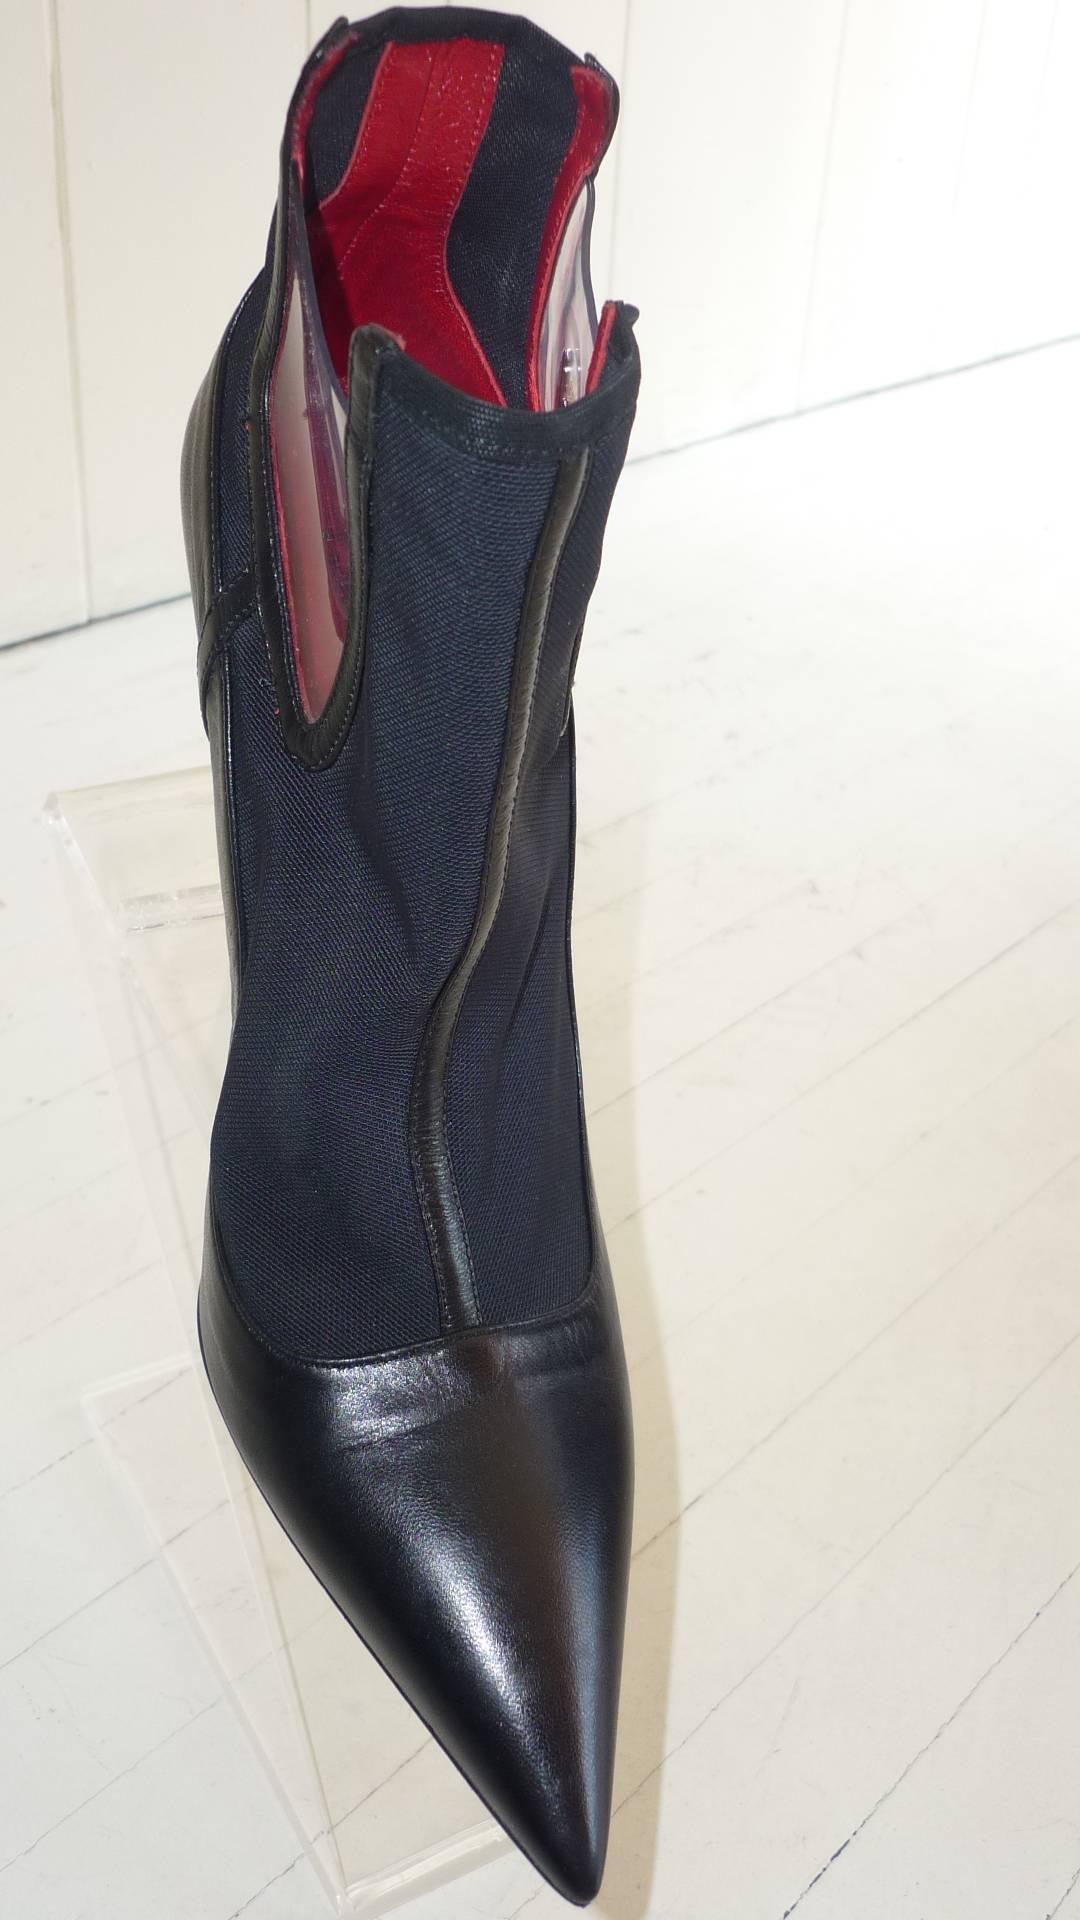 Never worn stiletto boots in black leather with plastic see through sides and spandex mesh. 

The dagger logo features on the plastic, as well as the sole.

The heels are 4